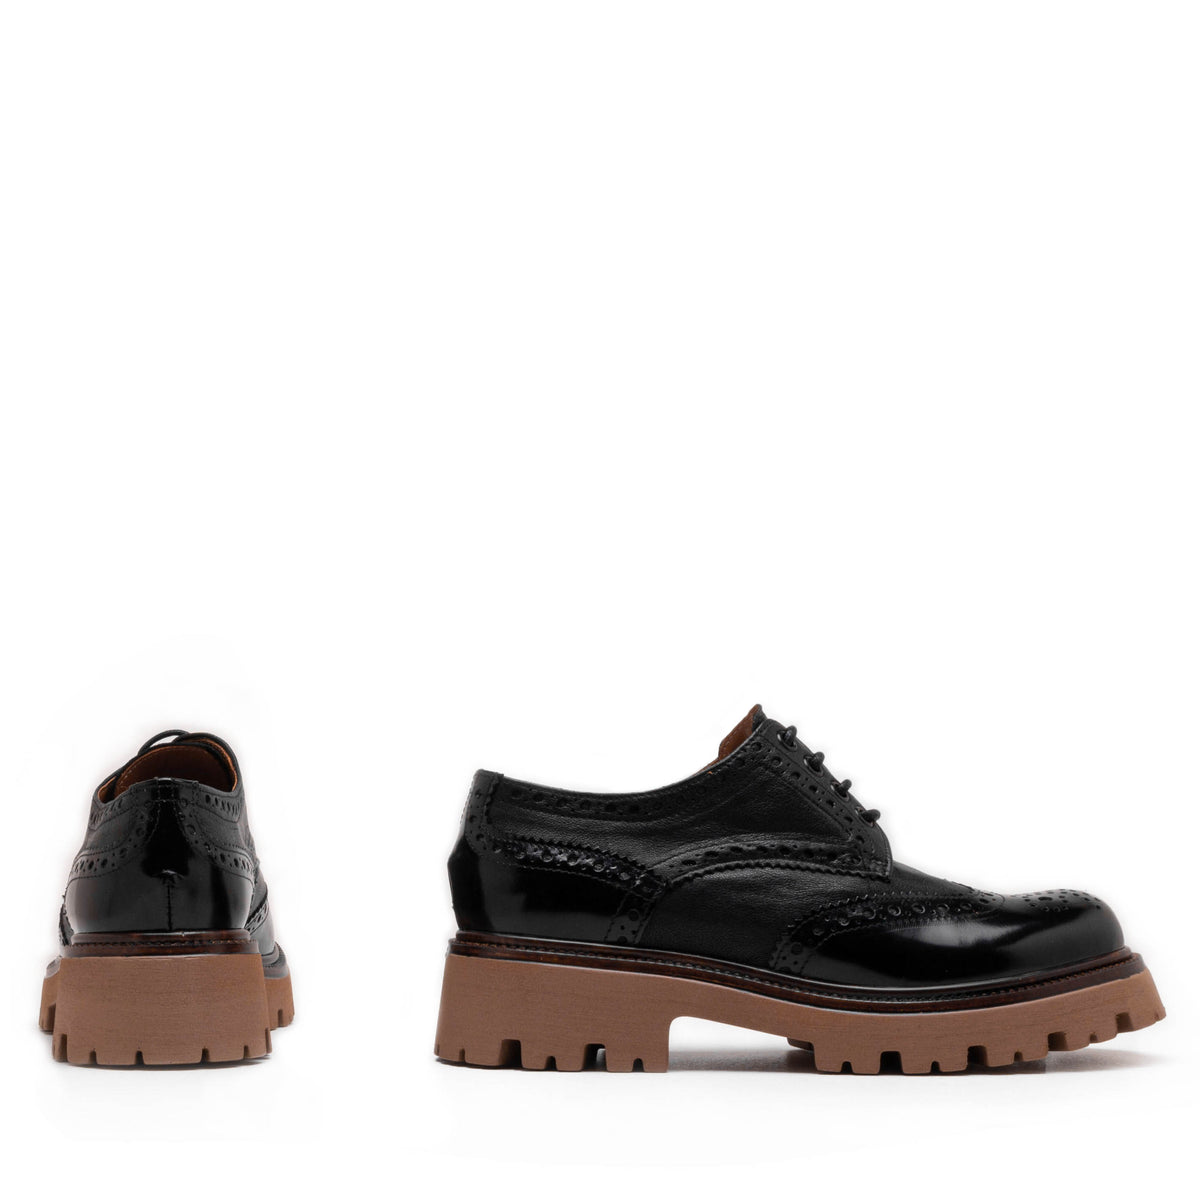 MOTOWN LACE-UP LOAFER